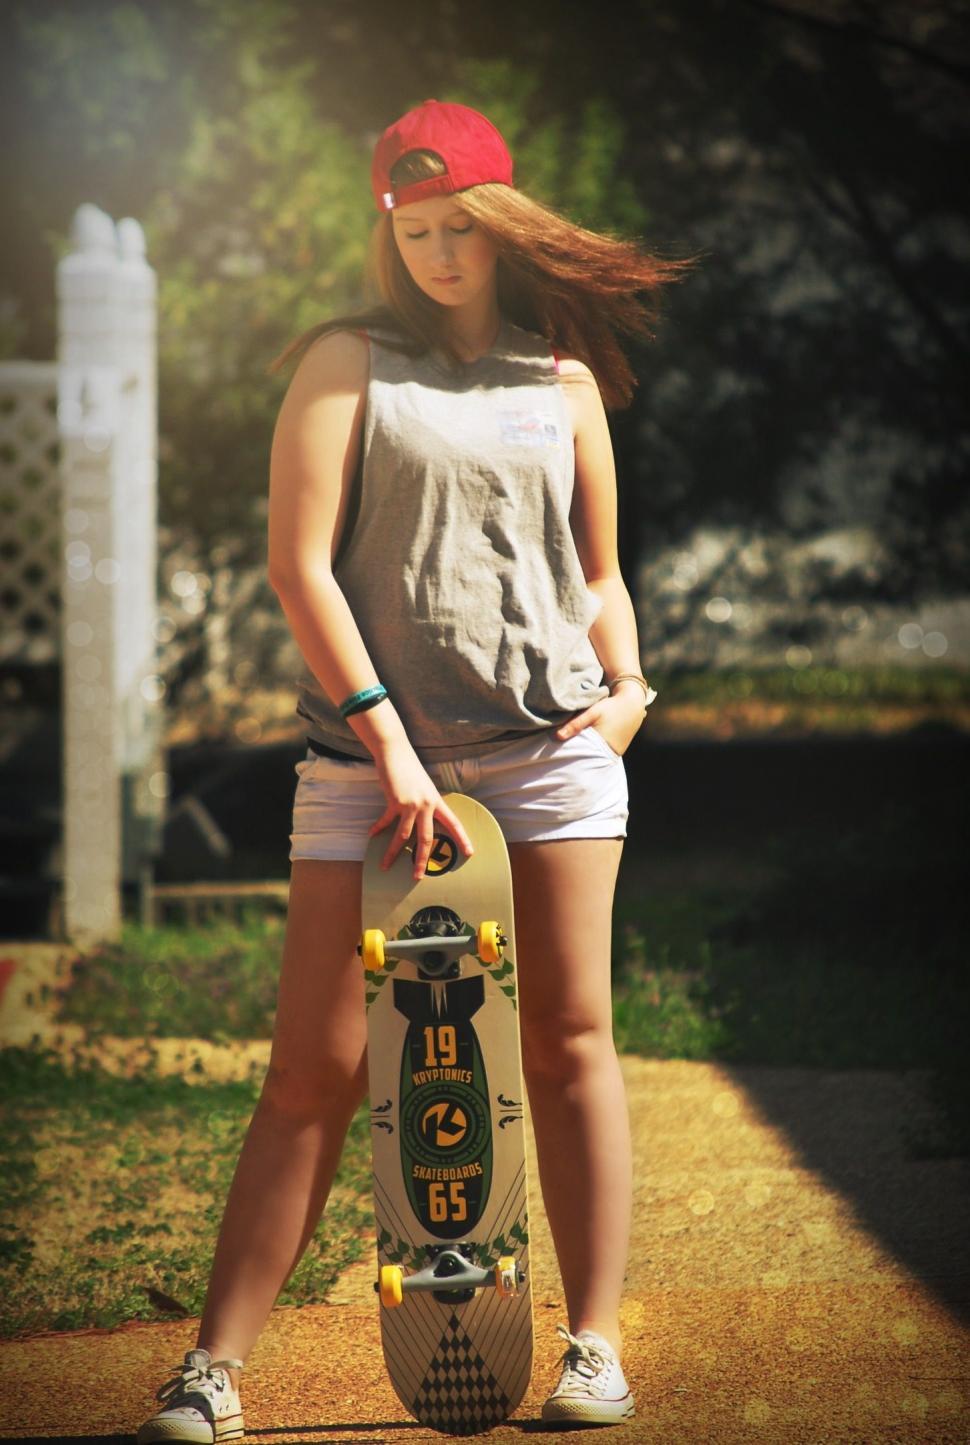 Free Image of Stylish Woman With Skateboard - Looking Down  